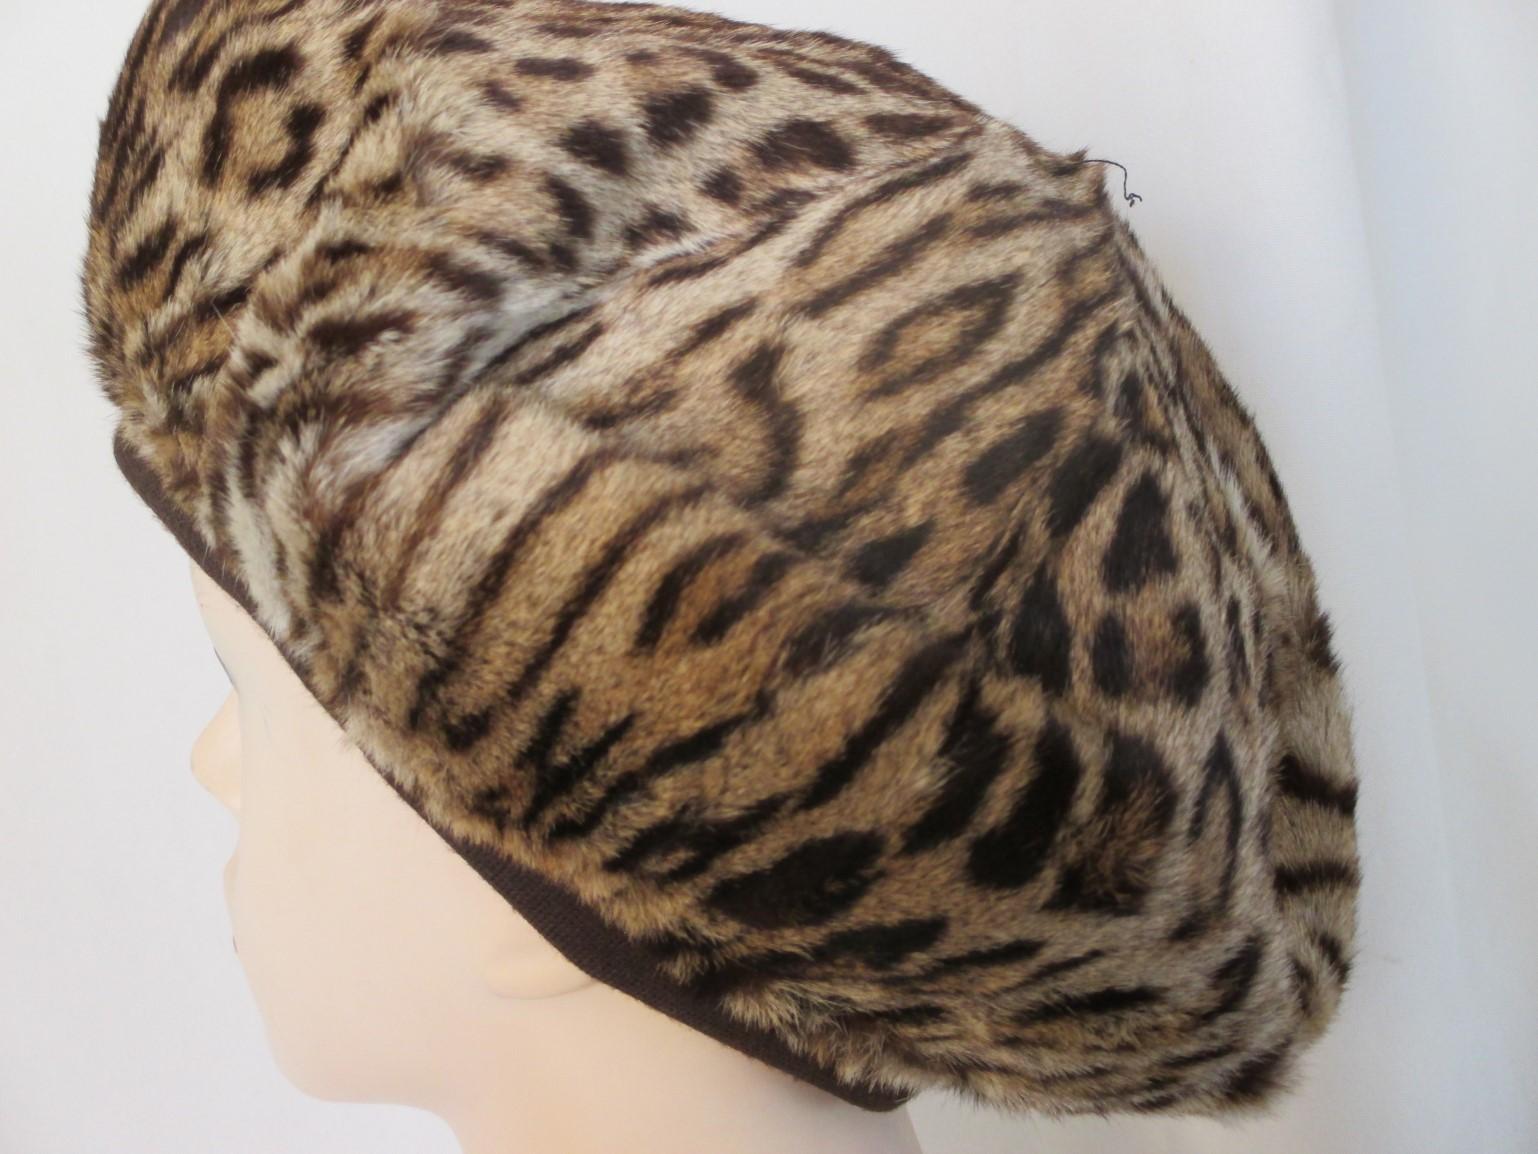 This hat is made in the 1940's and in good vintage condition
57 / 58 cm / 22.44 - 22.83 inch. circumference

Please note that vintage items are not new and therefore might have minor imperfections. 